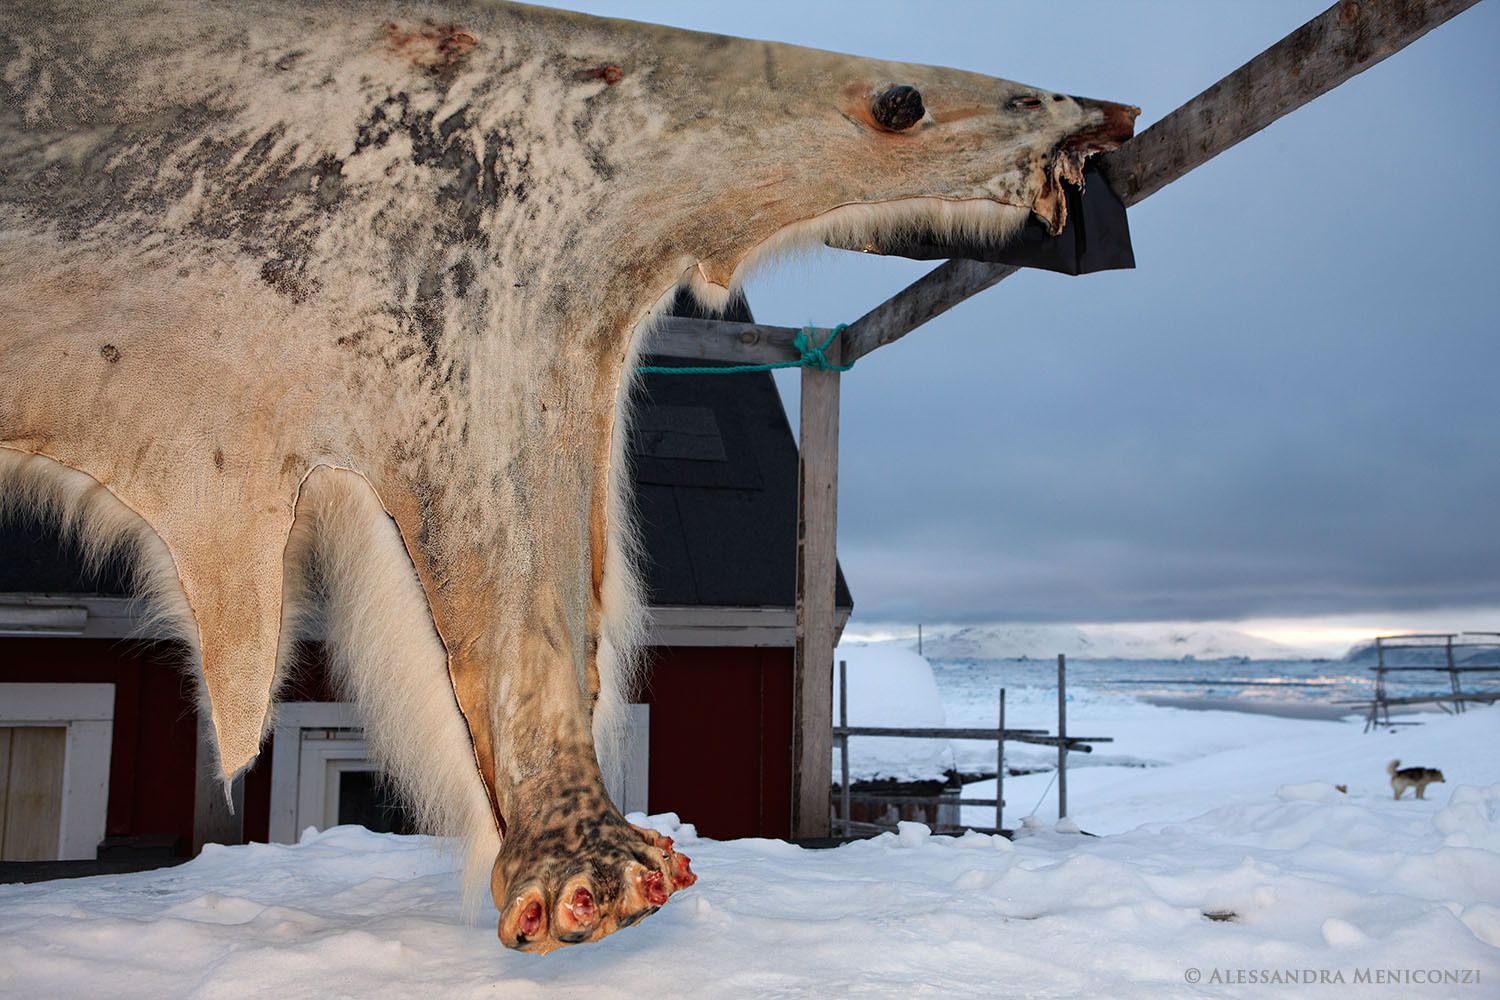 The pelt of a polar bear, killed by an Intuit hunter, hangs to dry outside the hunter's home in the small settlement of Tiniteqilaaq at the edge of Sermilik Fjord in southeast Greenland.